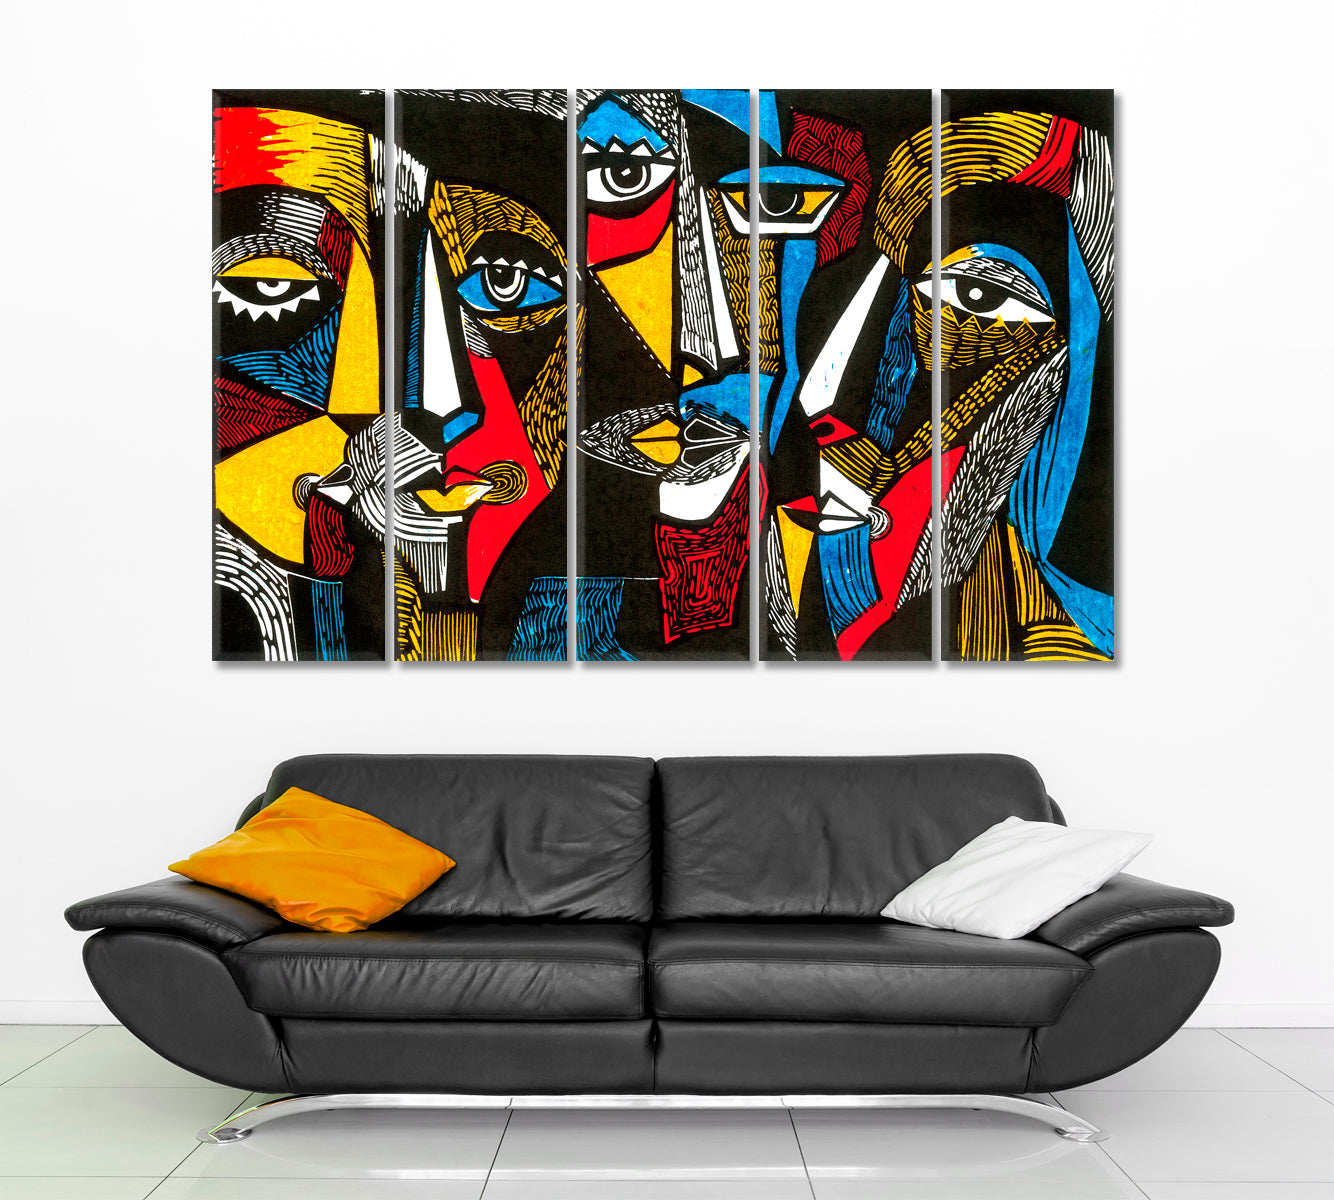 Abstract Surreal-colored Faces Yellow Red White Blue Black Abstract Art Print Artesty 5 panels 36" x 24" 